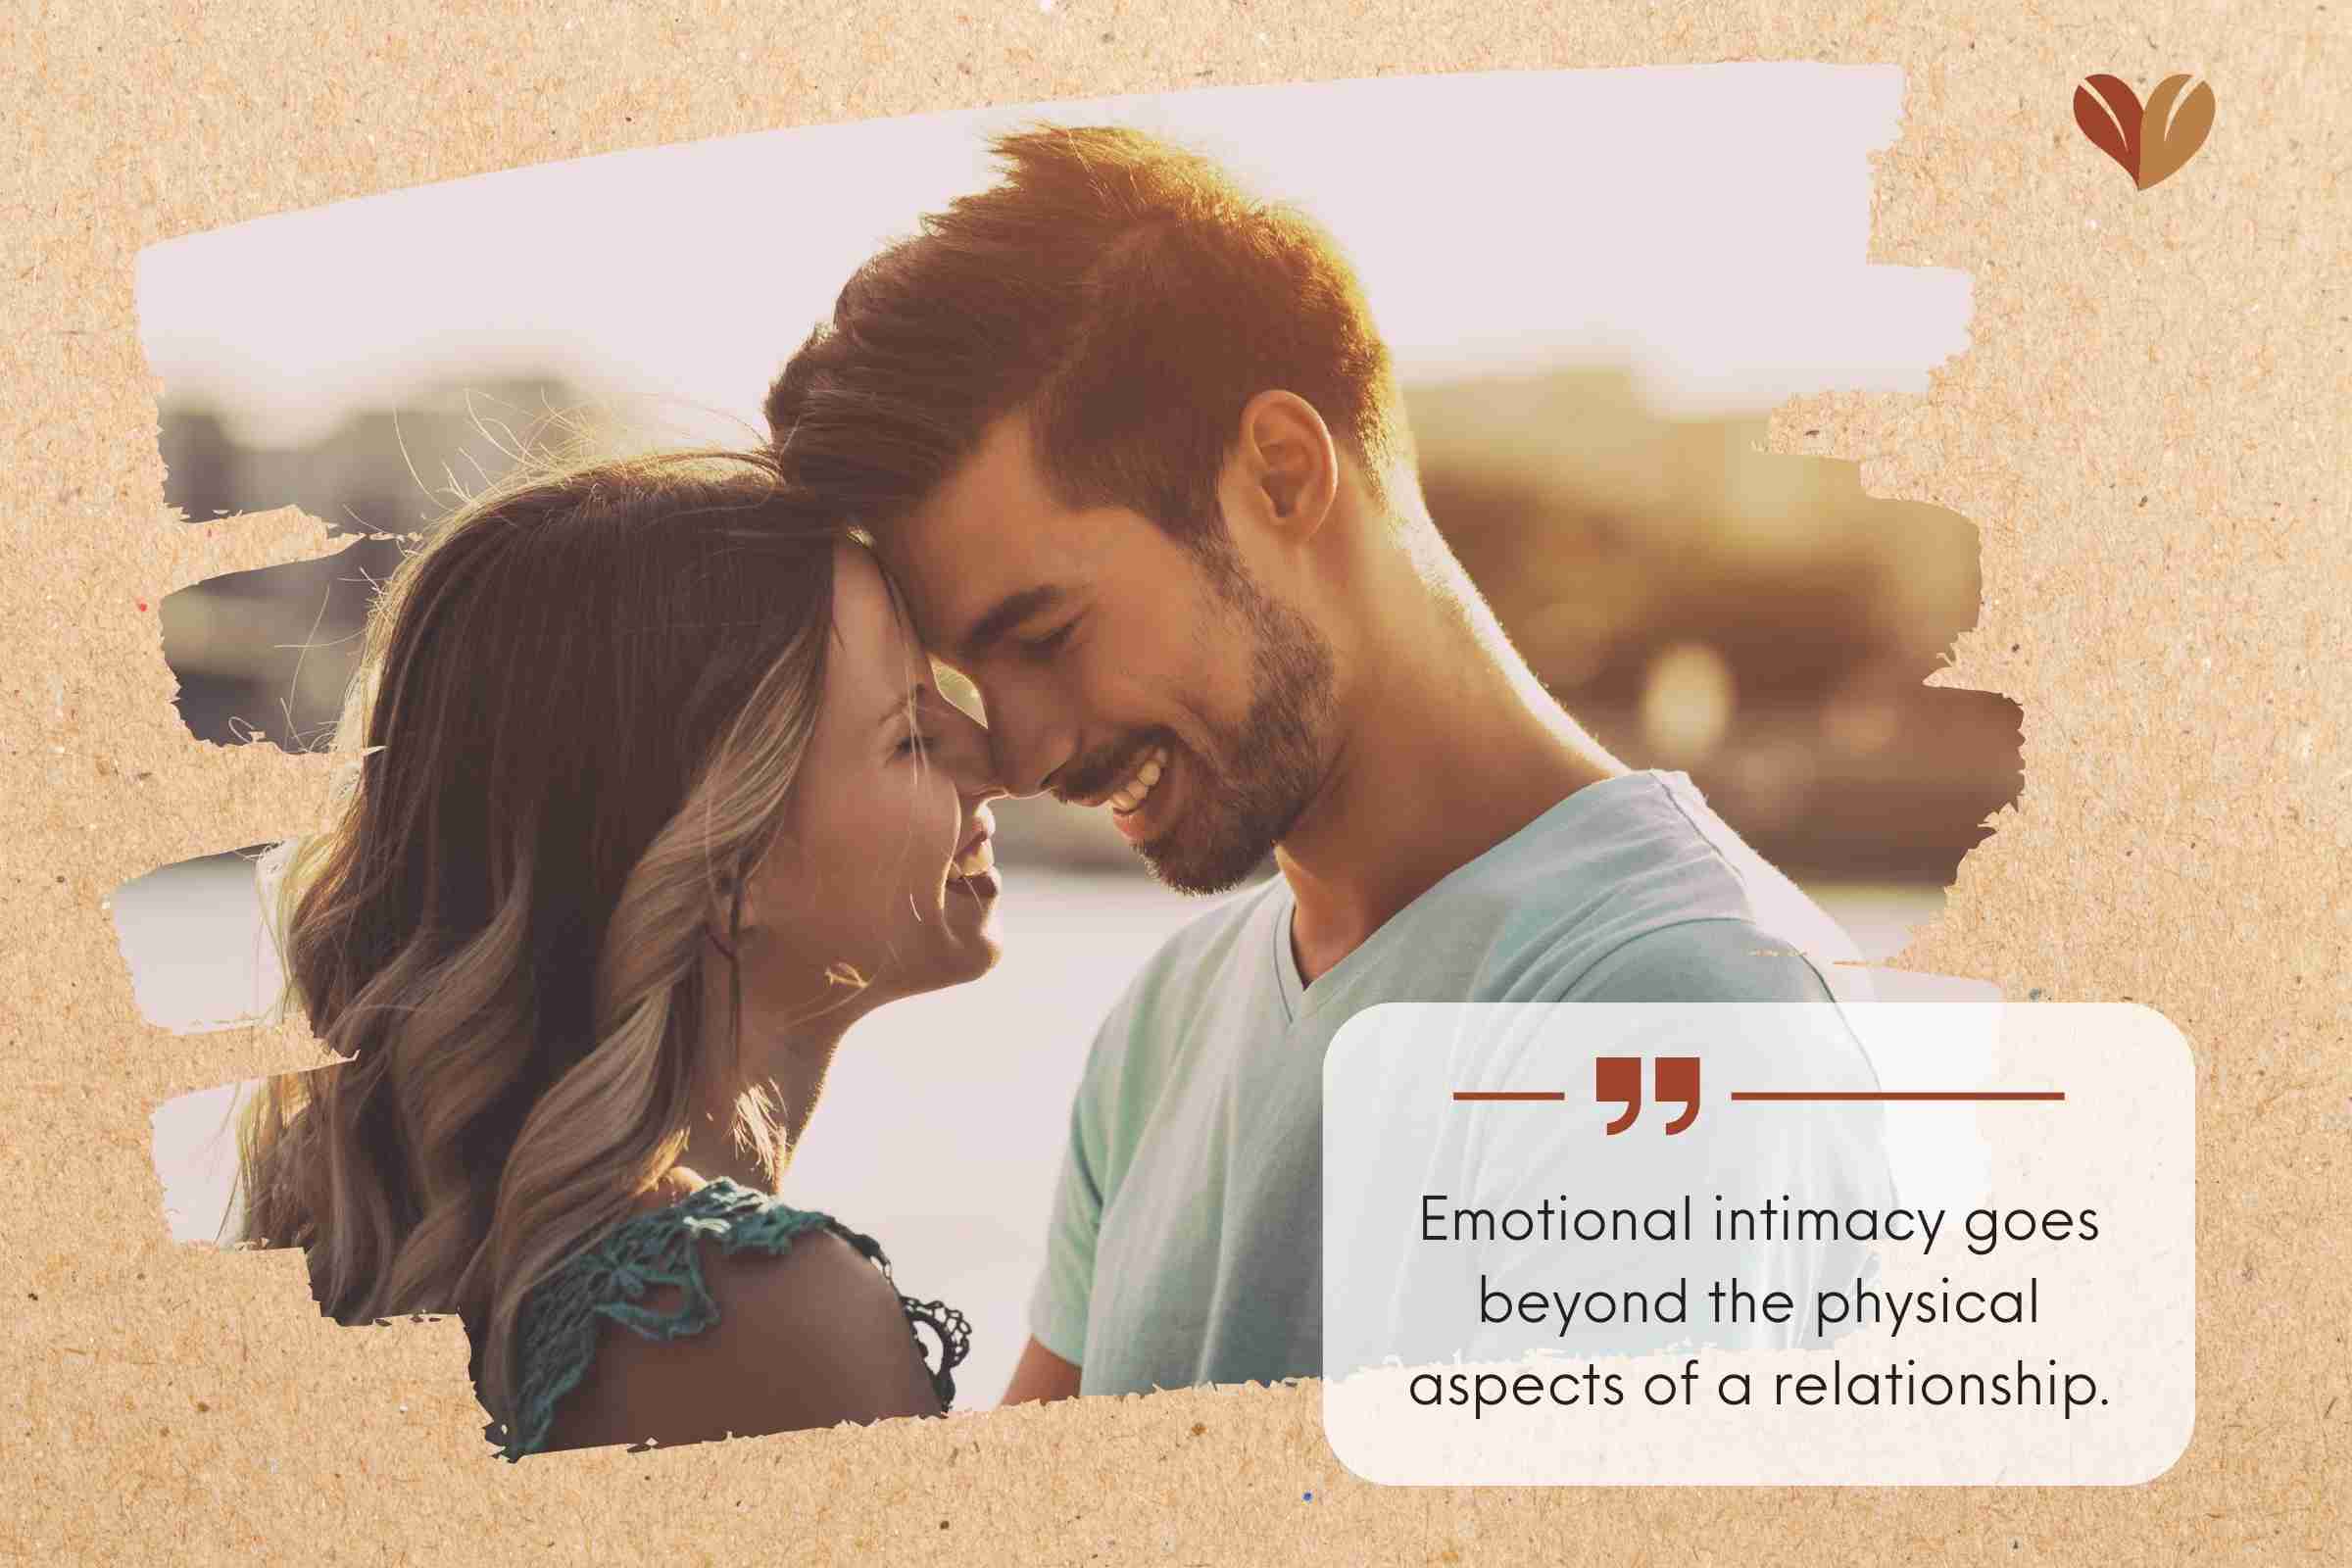 Emotional intimacy goes beyond the physical aspects of a relationship.